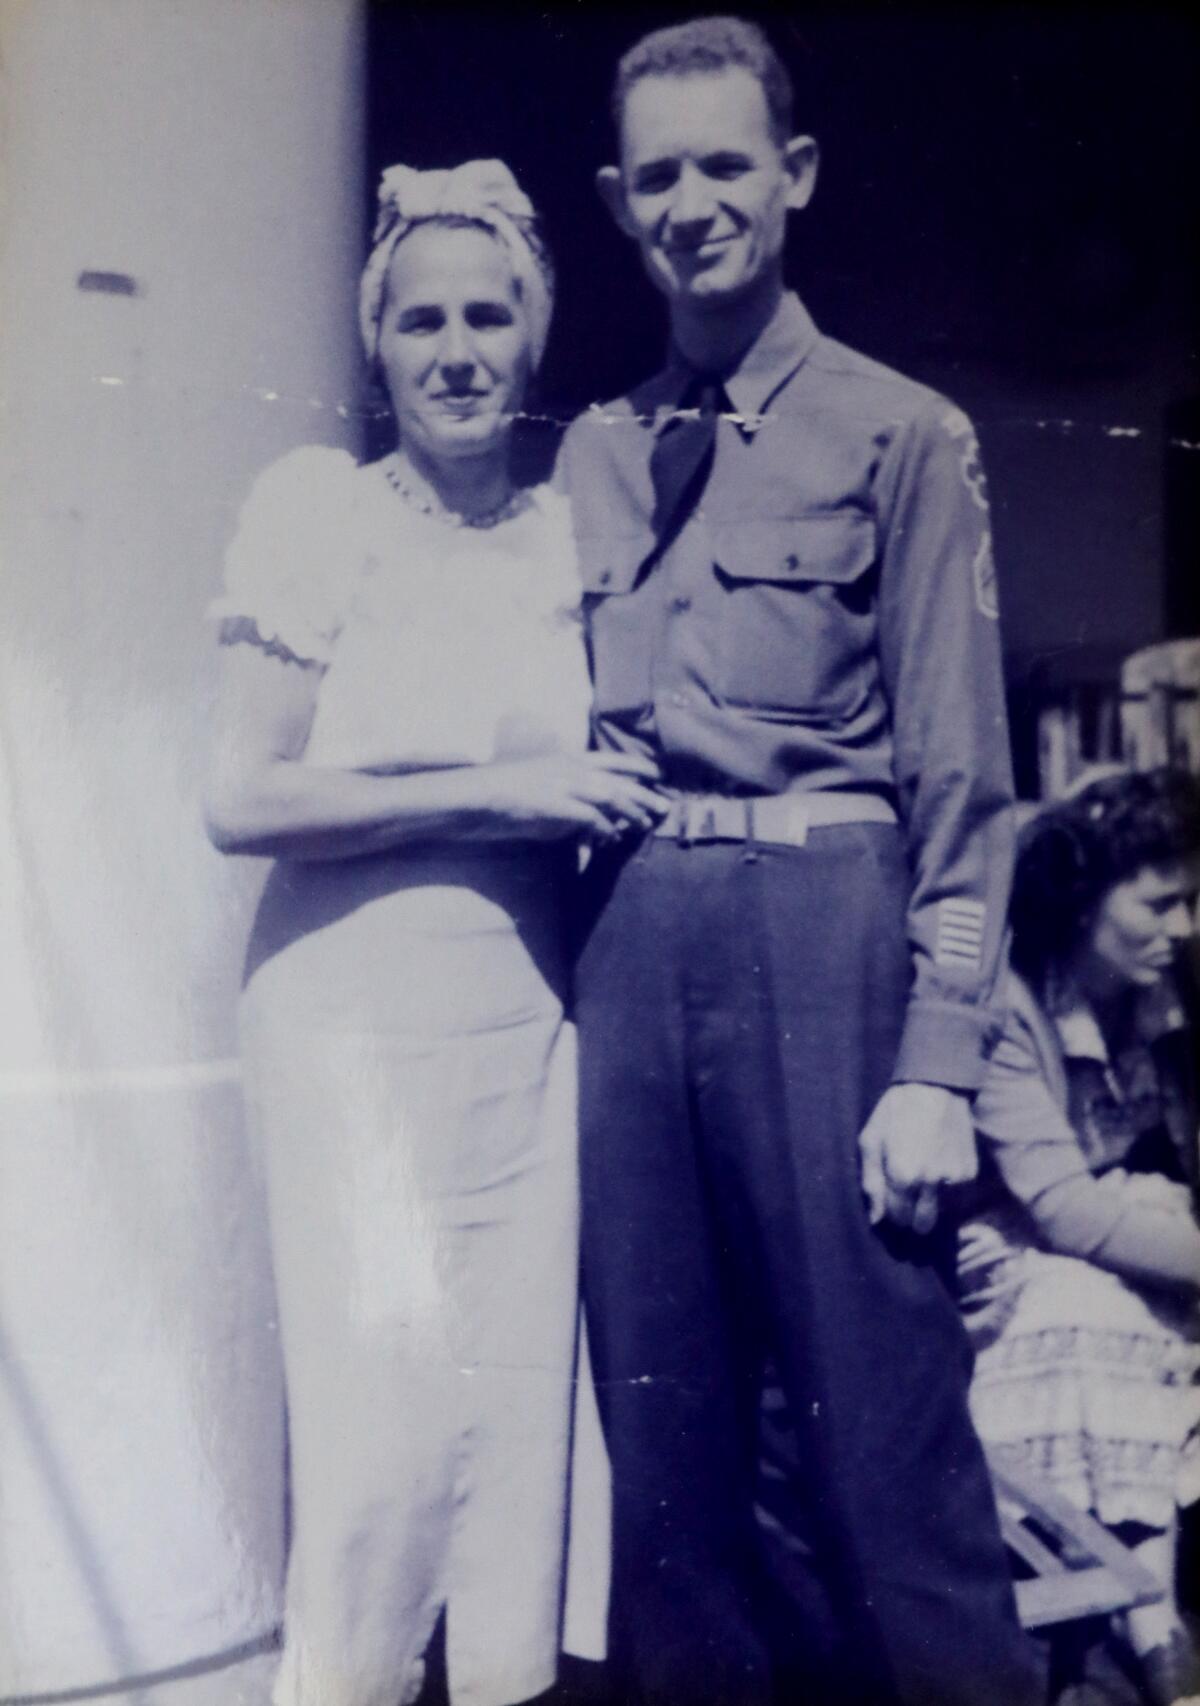 A photo of Paul Hult, right, with his wife, Zora Hult, taken aboard a ship around 1950.